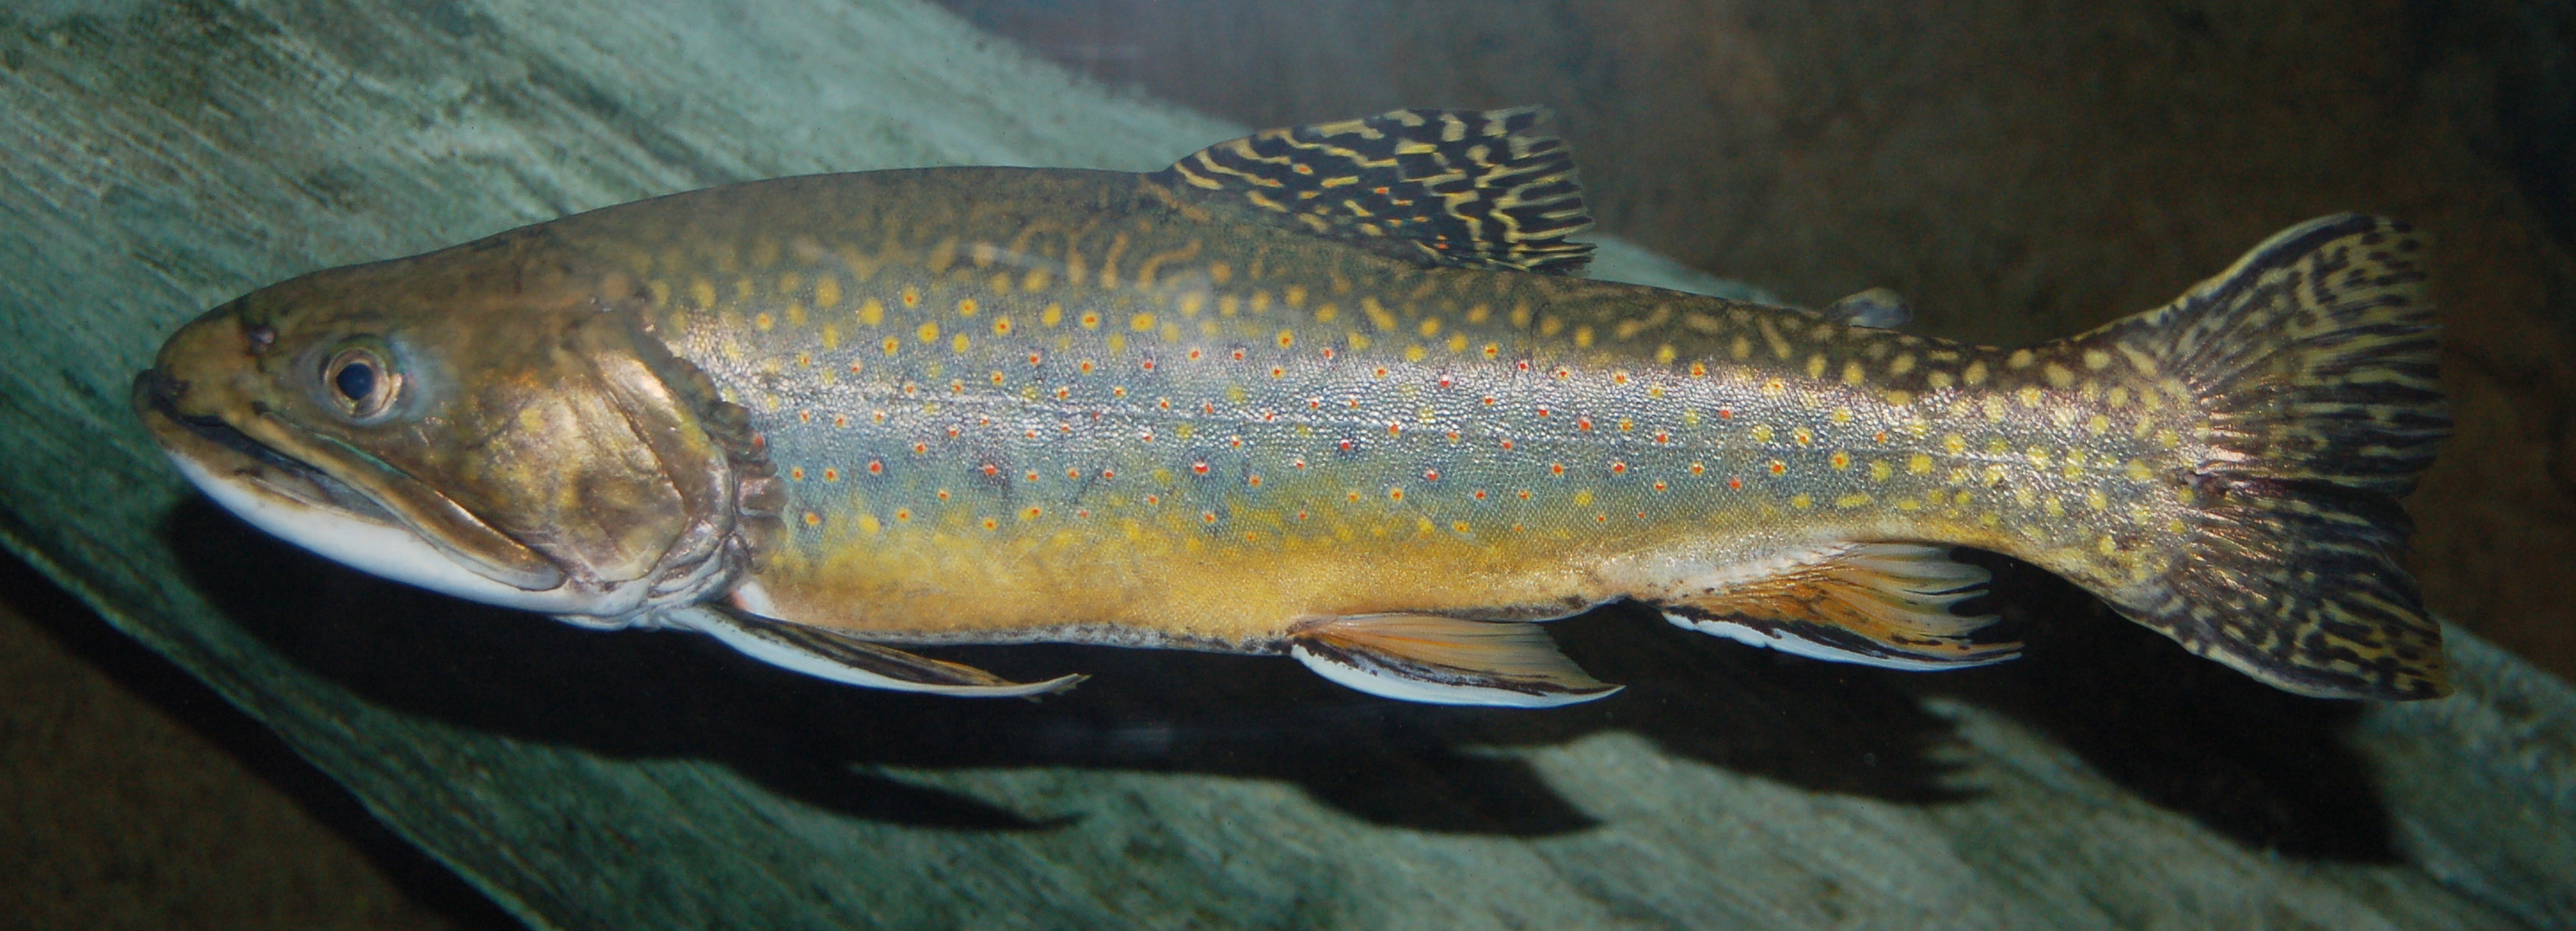 Brook Trout Photo And Wallpaper Cute Pictures